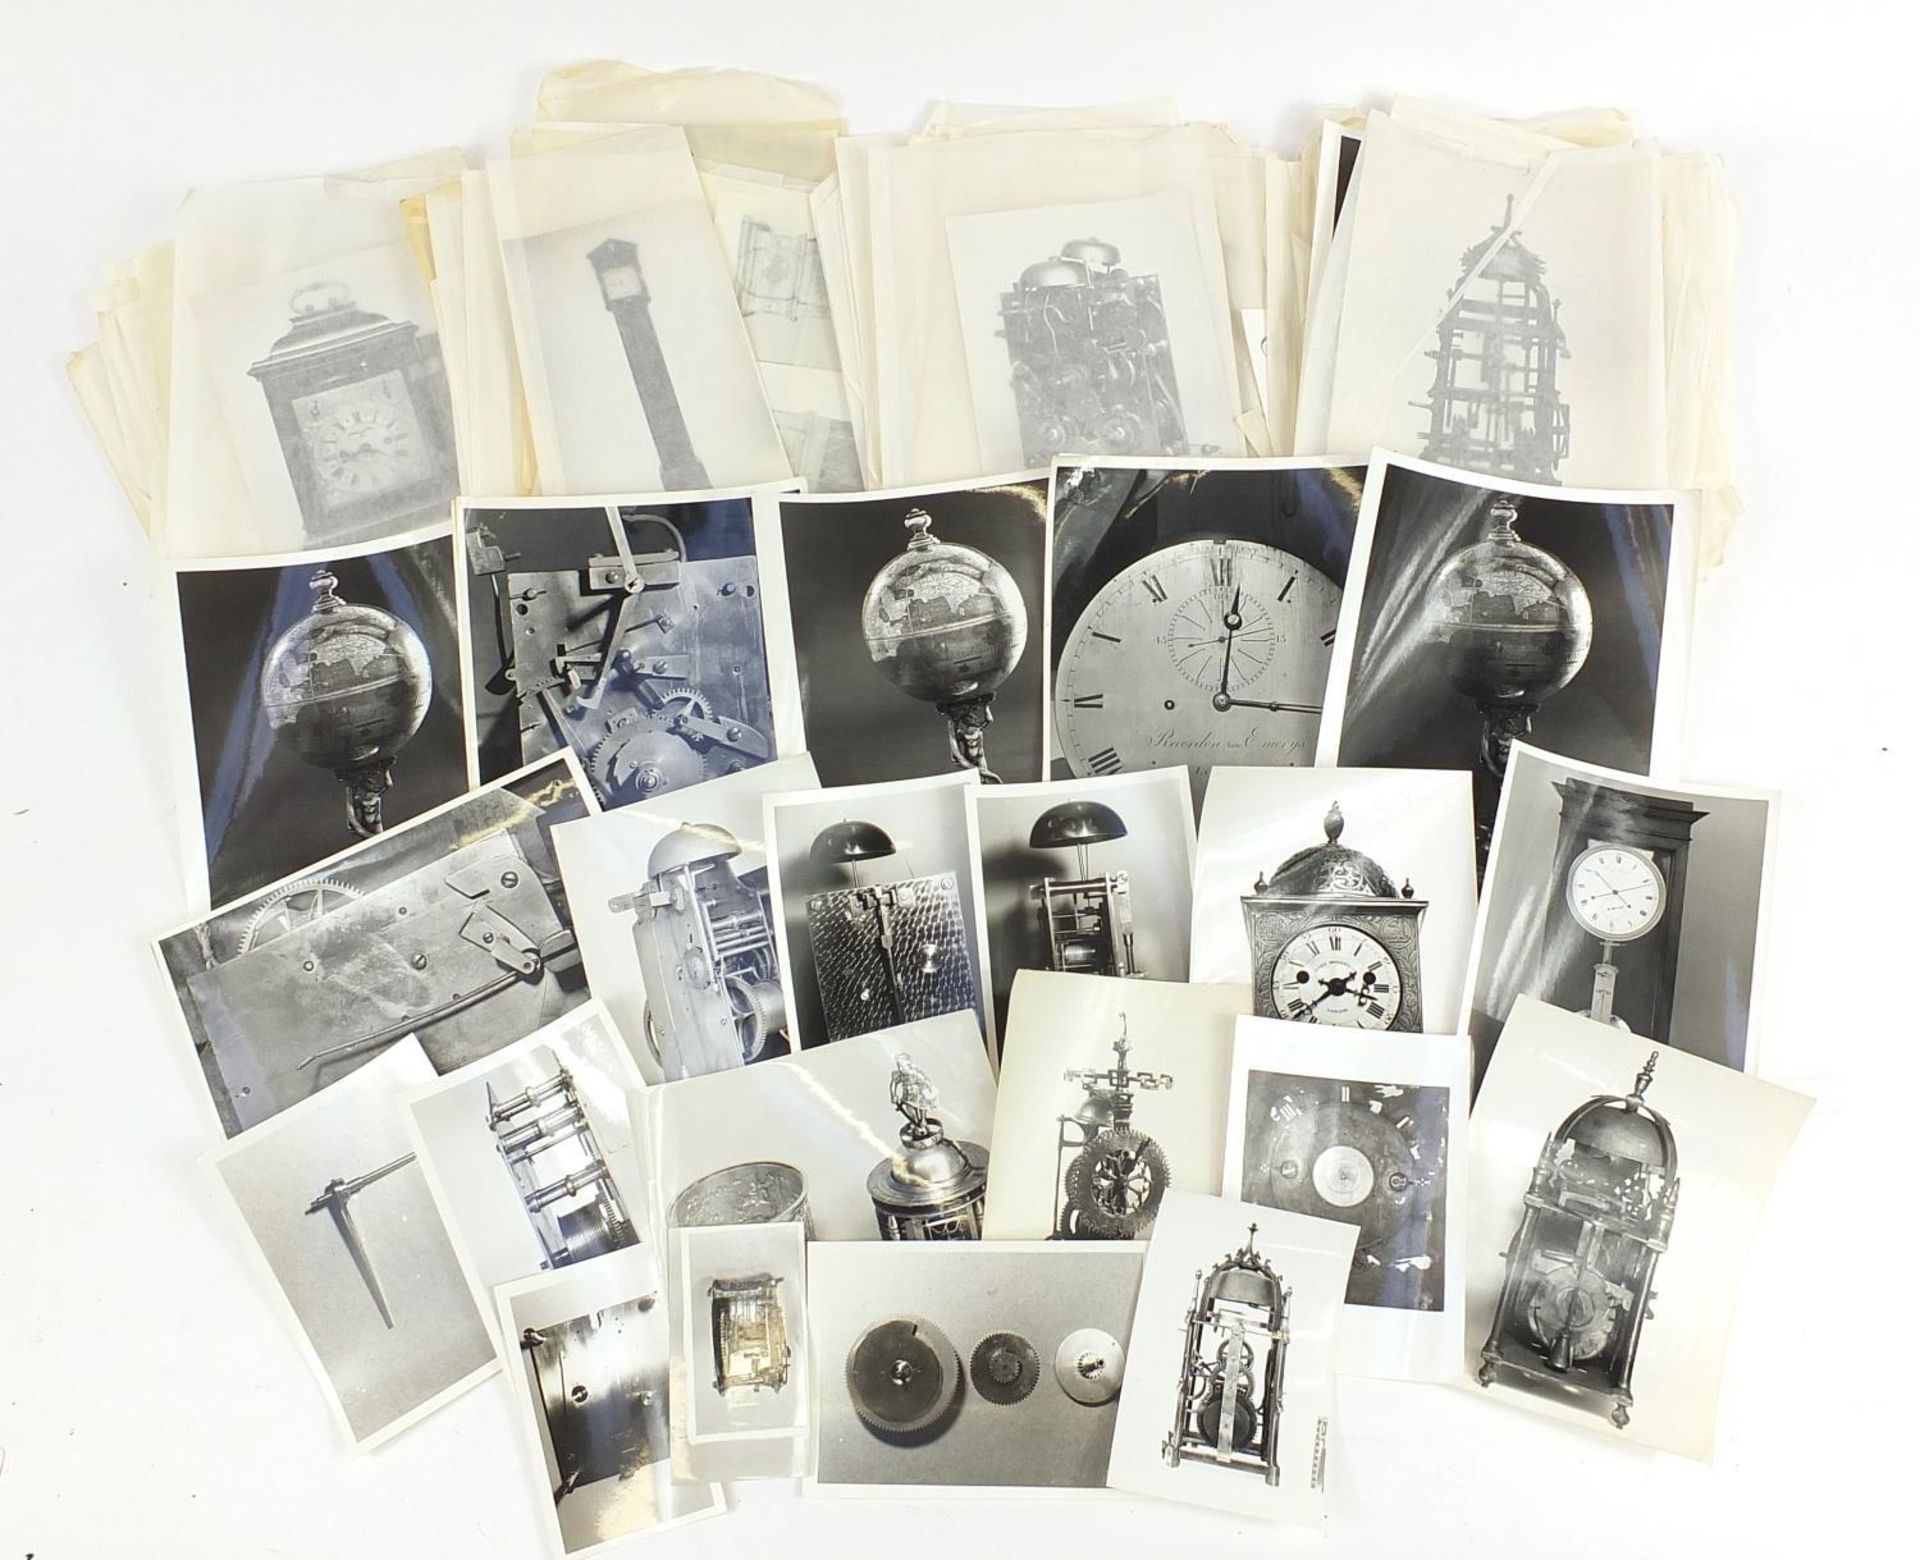 Collection of black and white photographs relating to clocks, some with copyright British Museum